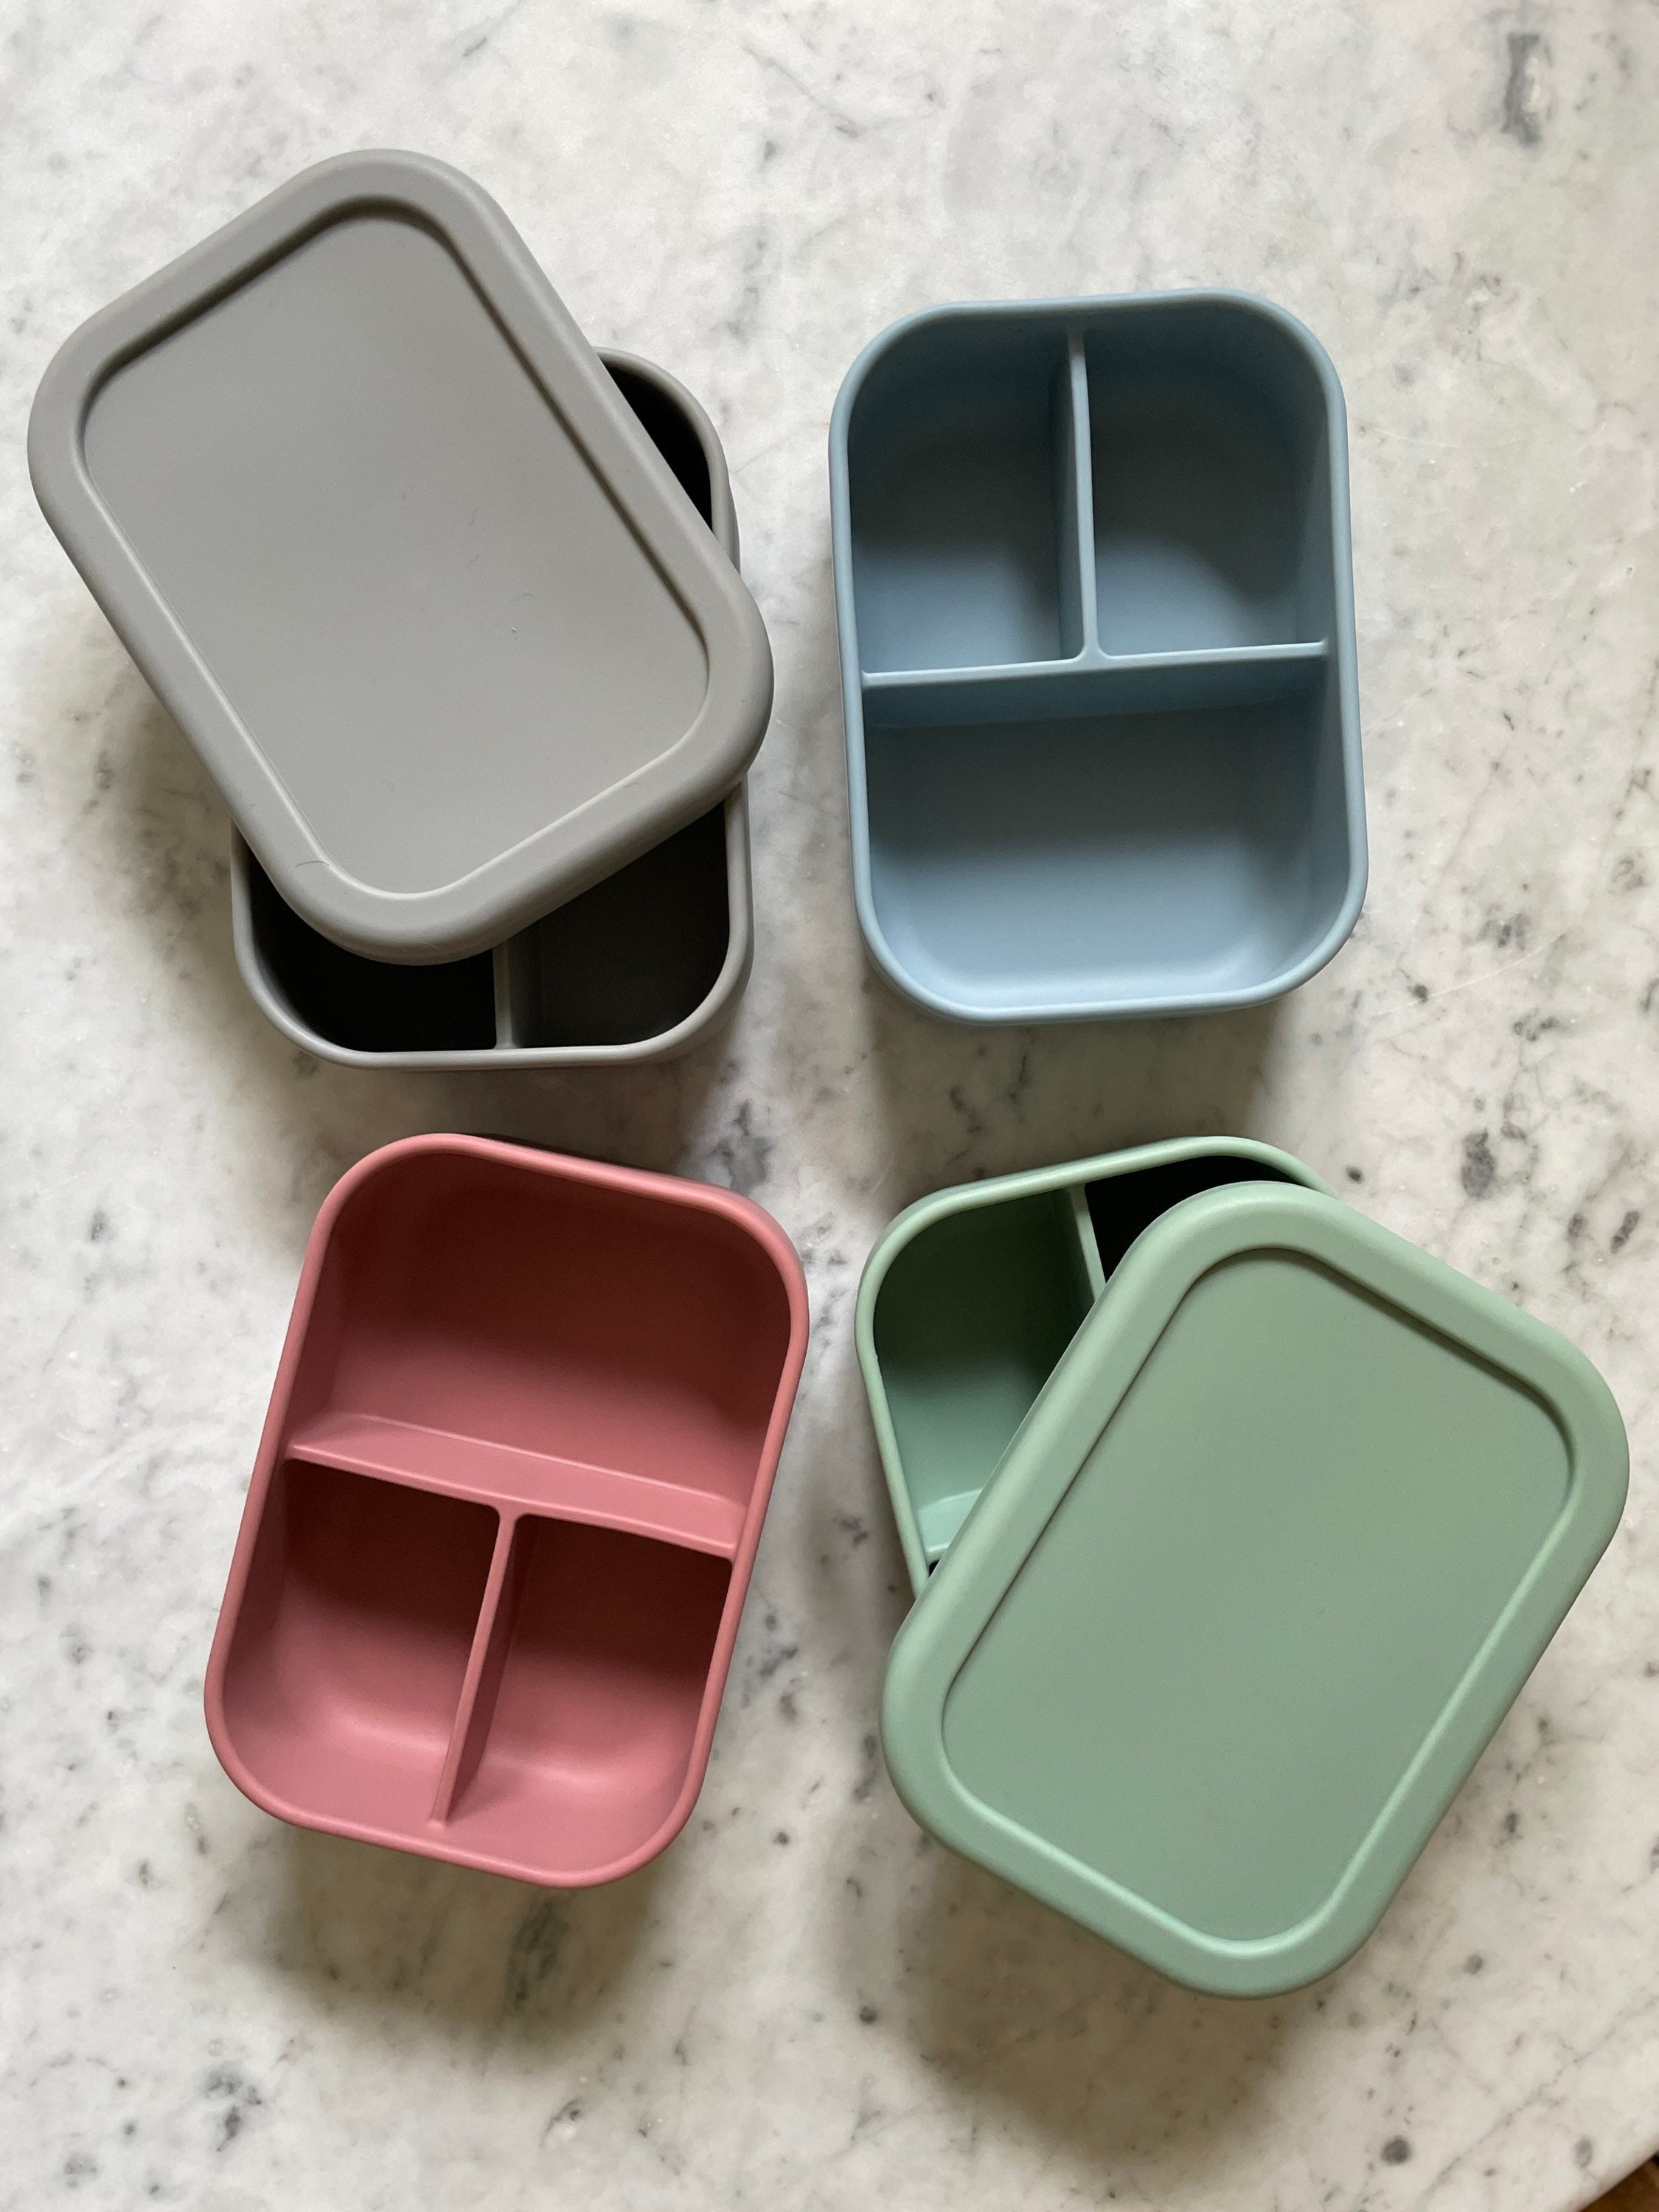 The Lucabox - 3 compartment Silicone lunchbox – Tabor Place